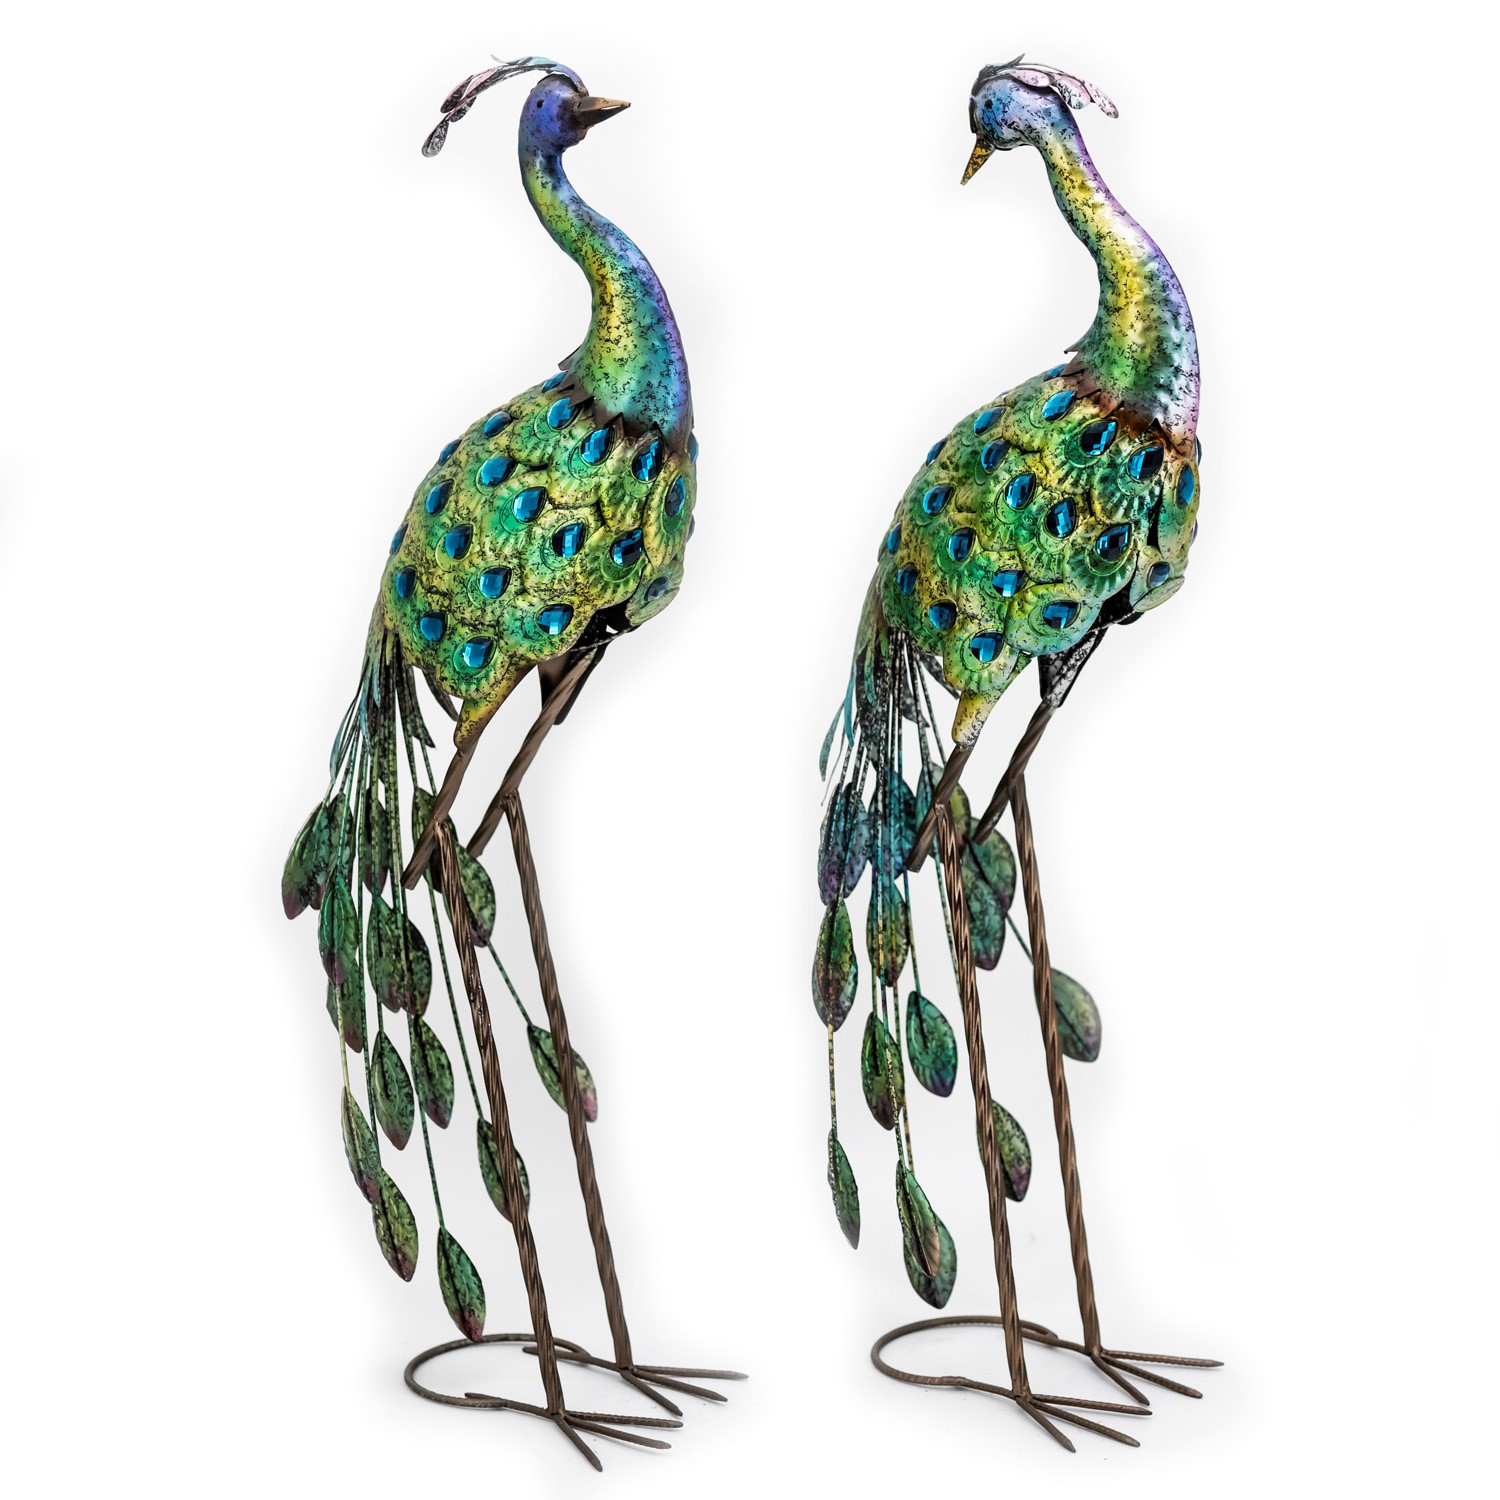 Large Peacocks w/Colorful Feathers (Set of 2) only $1,449.00 at Garden Fun